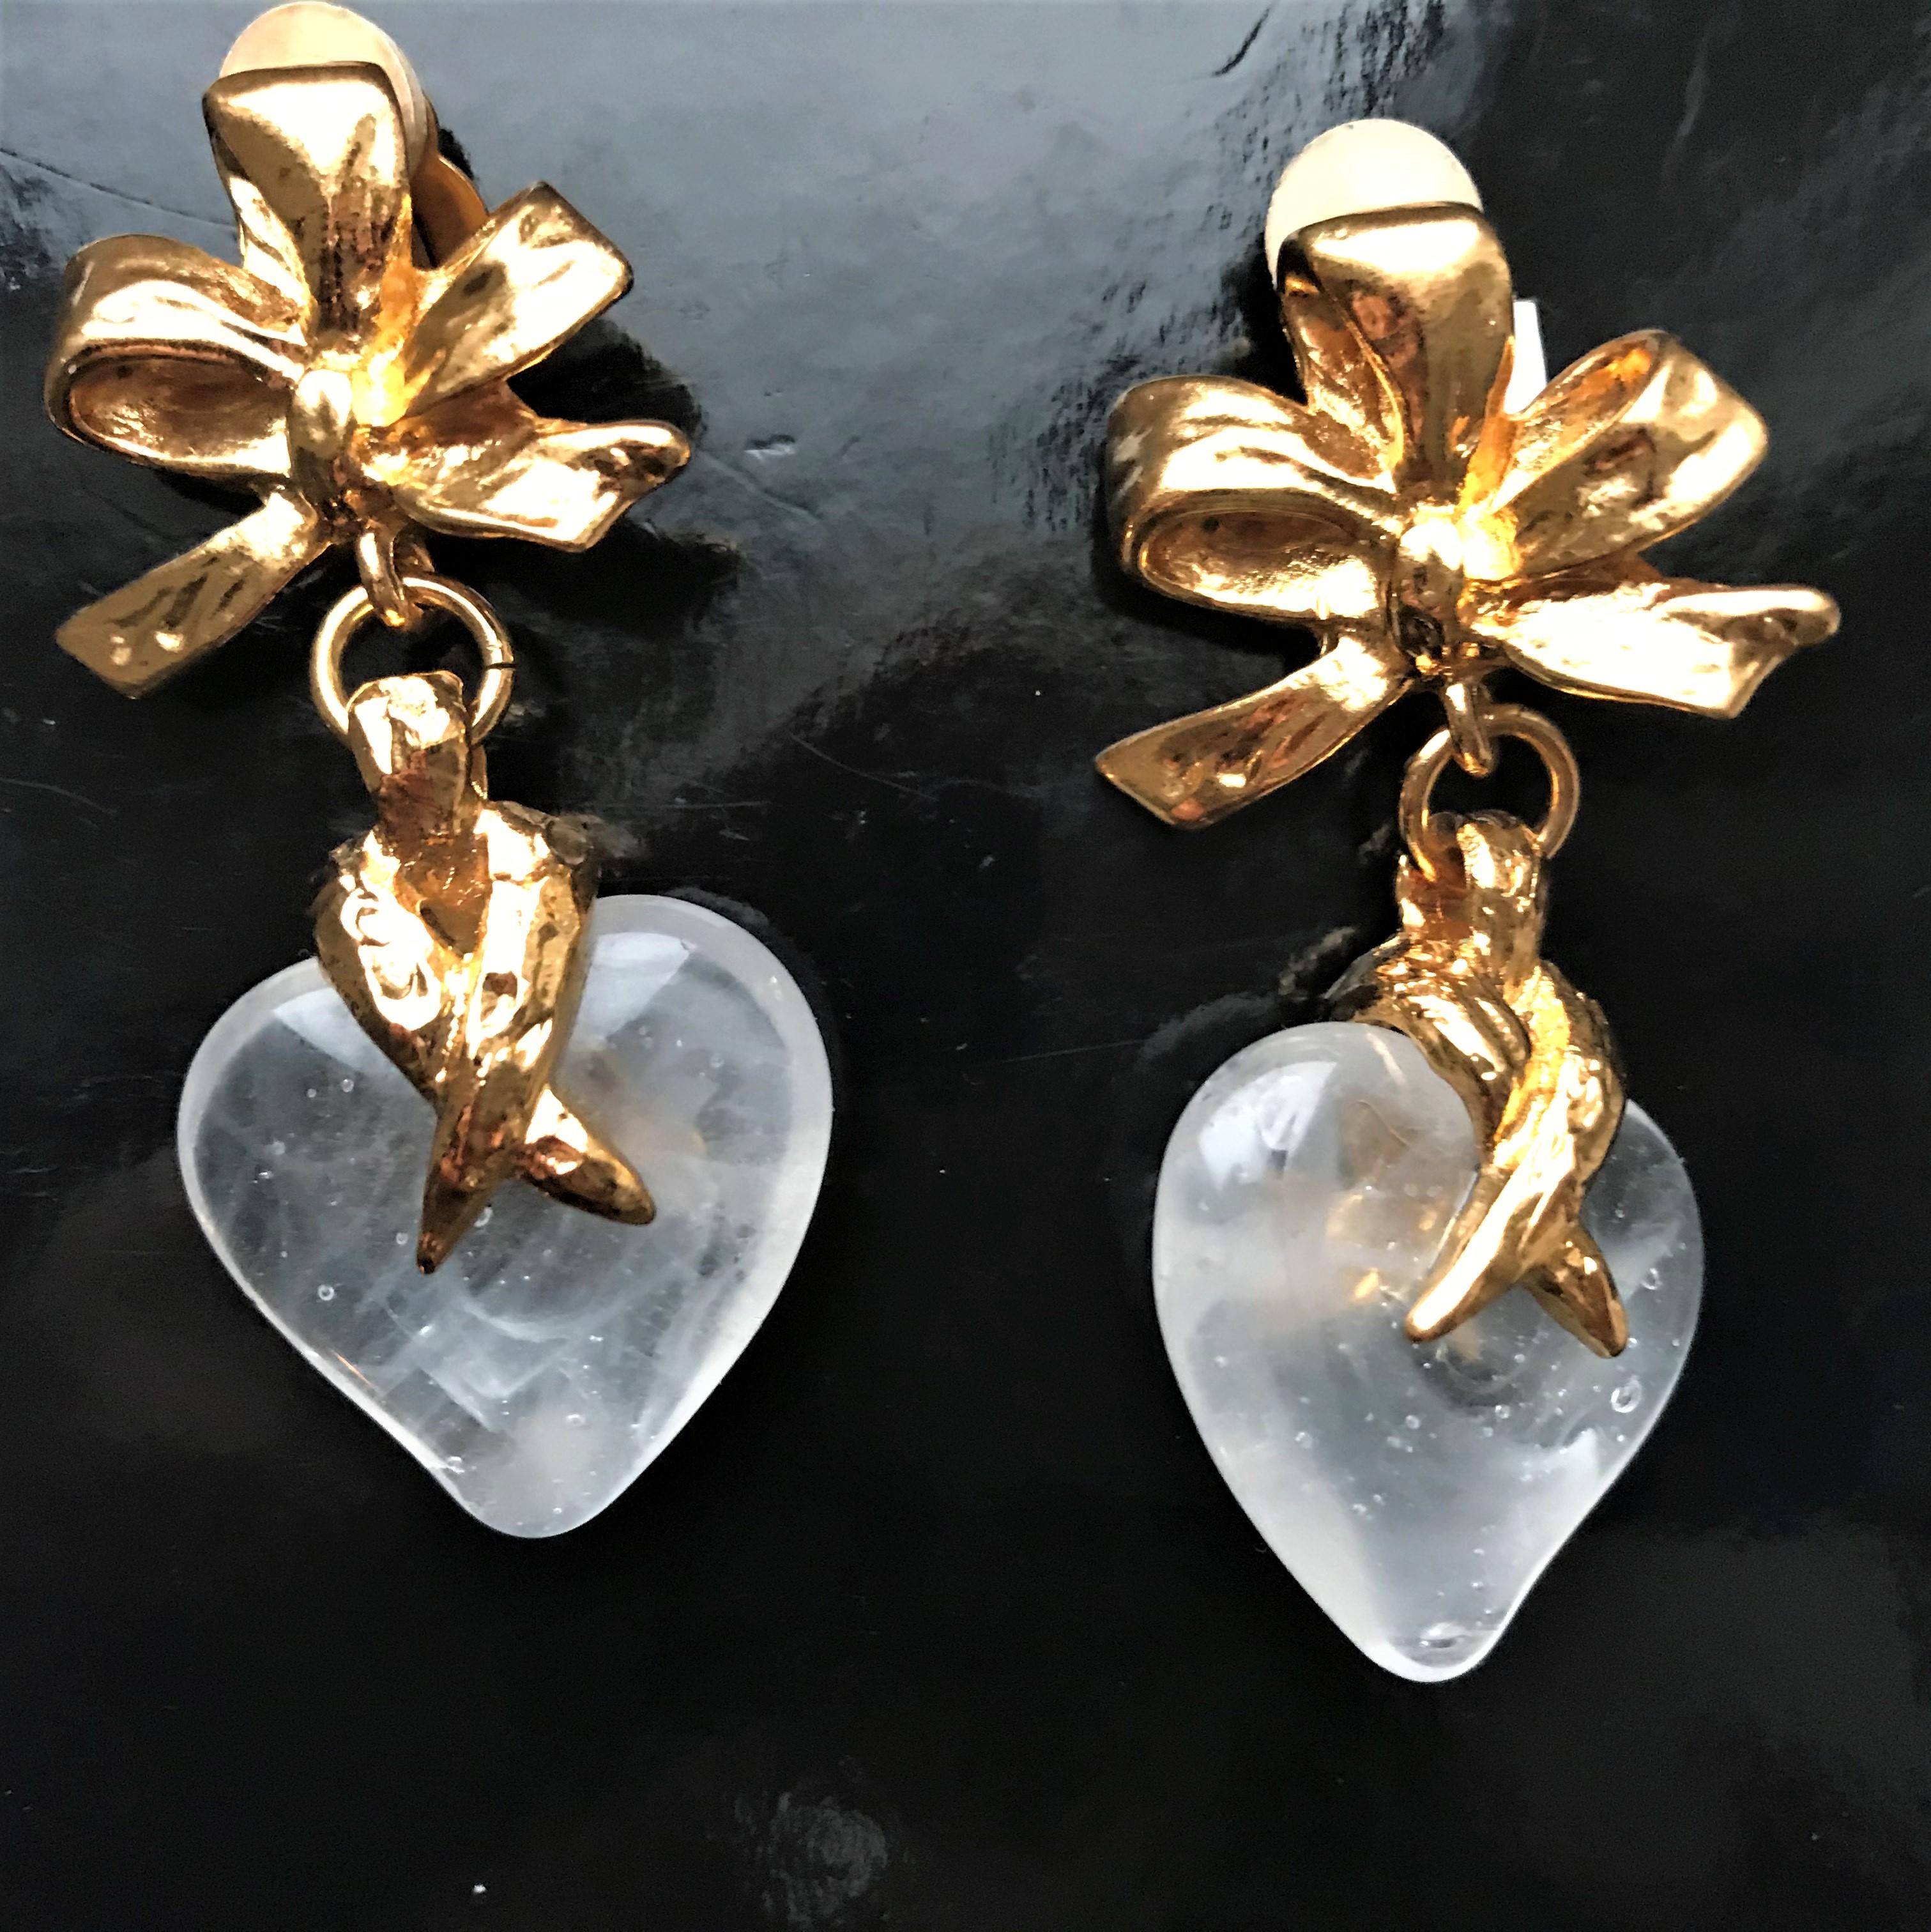 Valentin's day is coming soon !
Very lovely ear clips by Yves St. Laurent on a gold-plated bow hangs a transparent plastic heart. You'd think the heart is made of roc crystal. Inside you can see small bubbles and bullet holes, like the rock